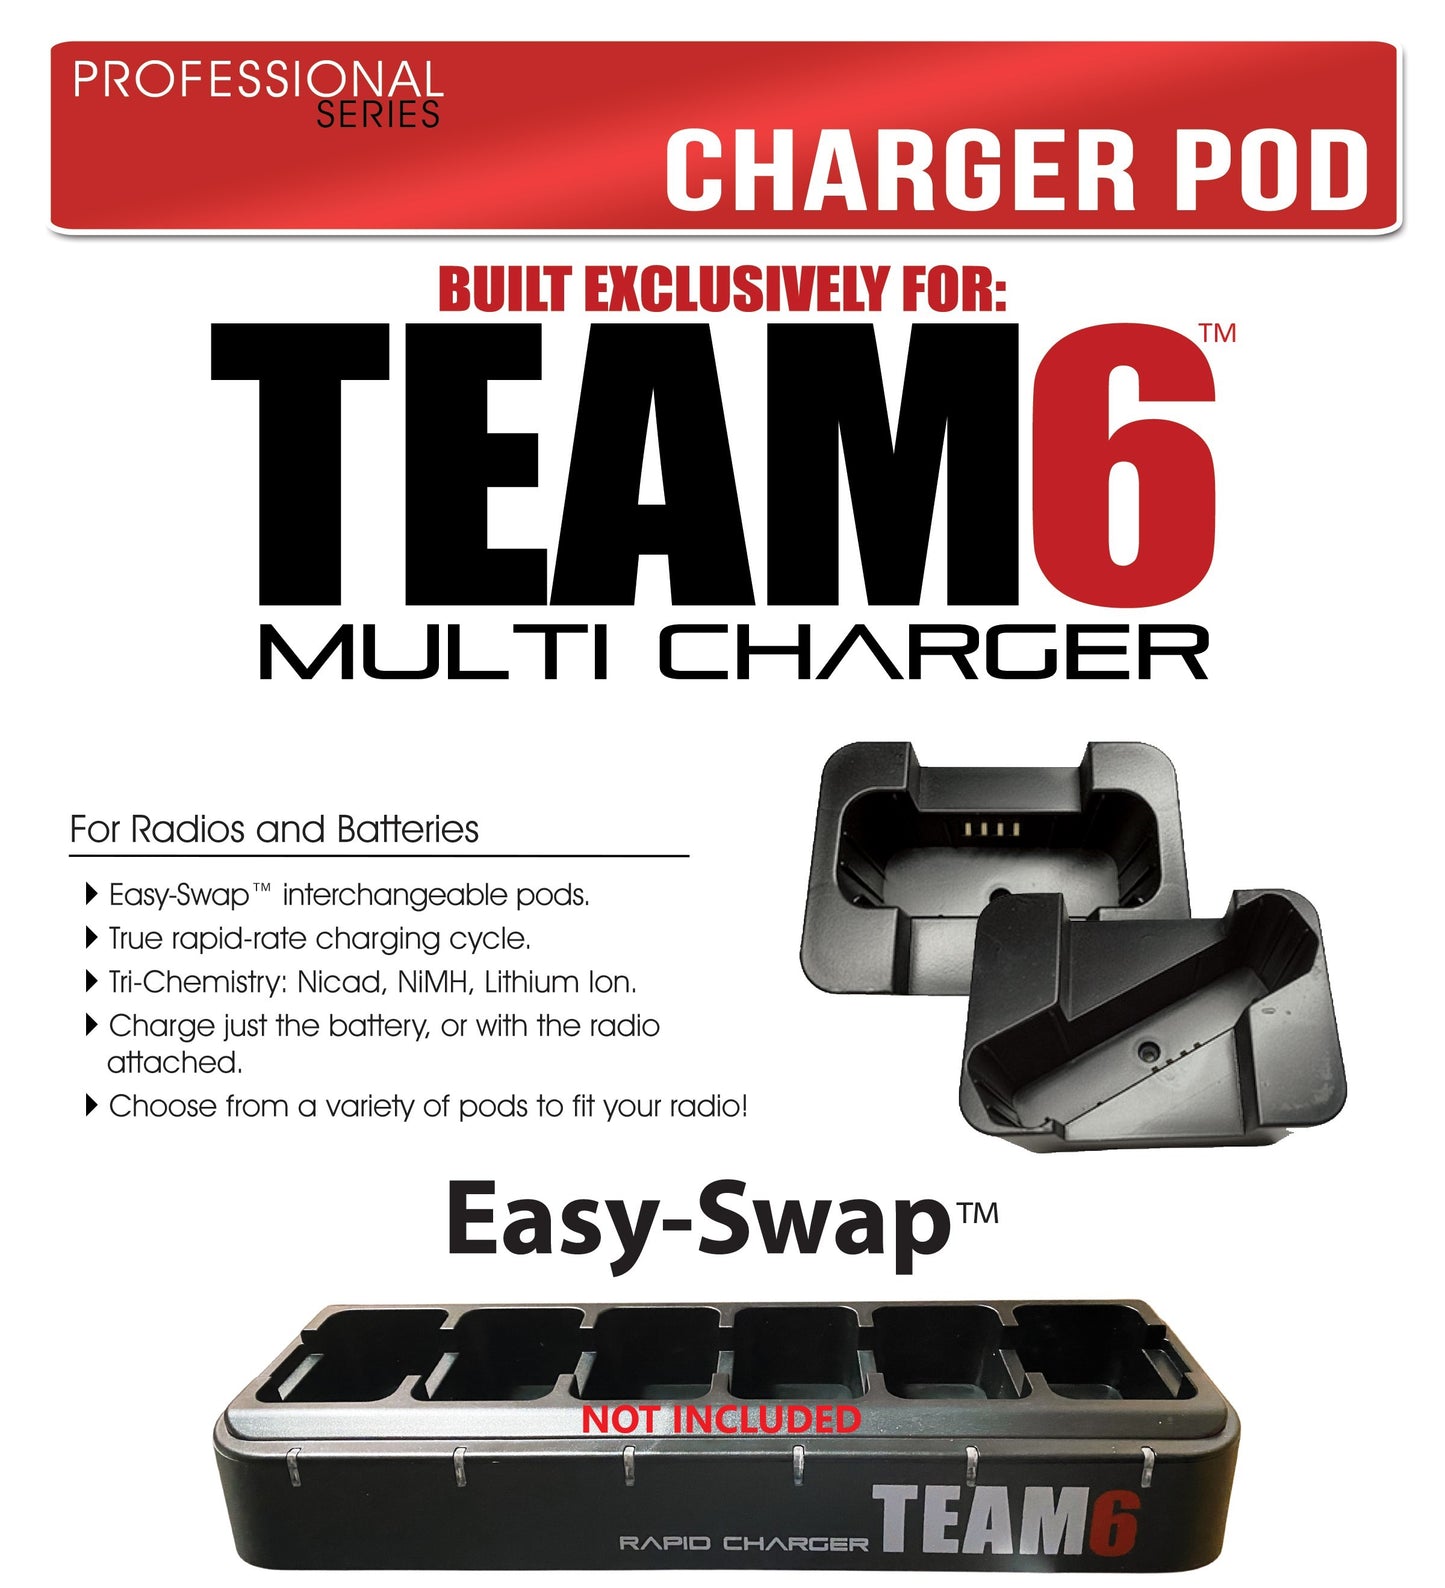 Klein TEAM6 Charger Pod for XP5plus